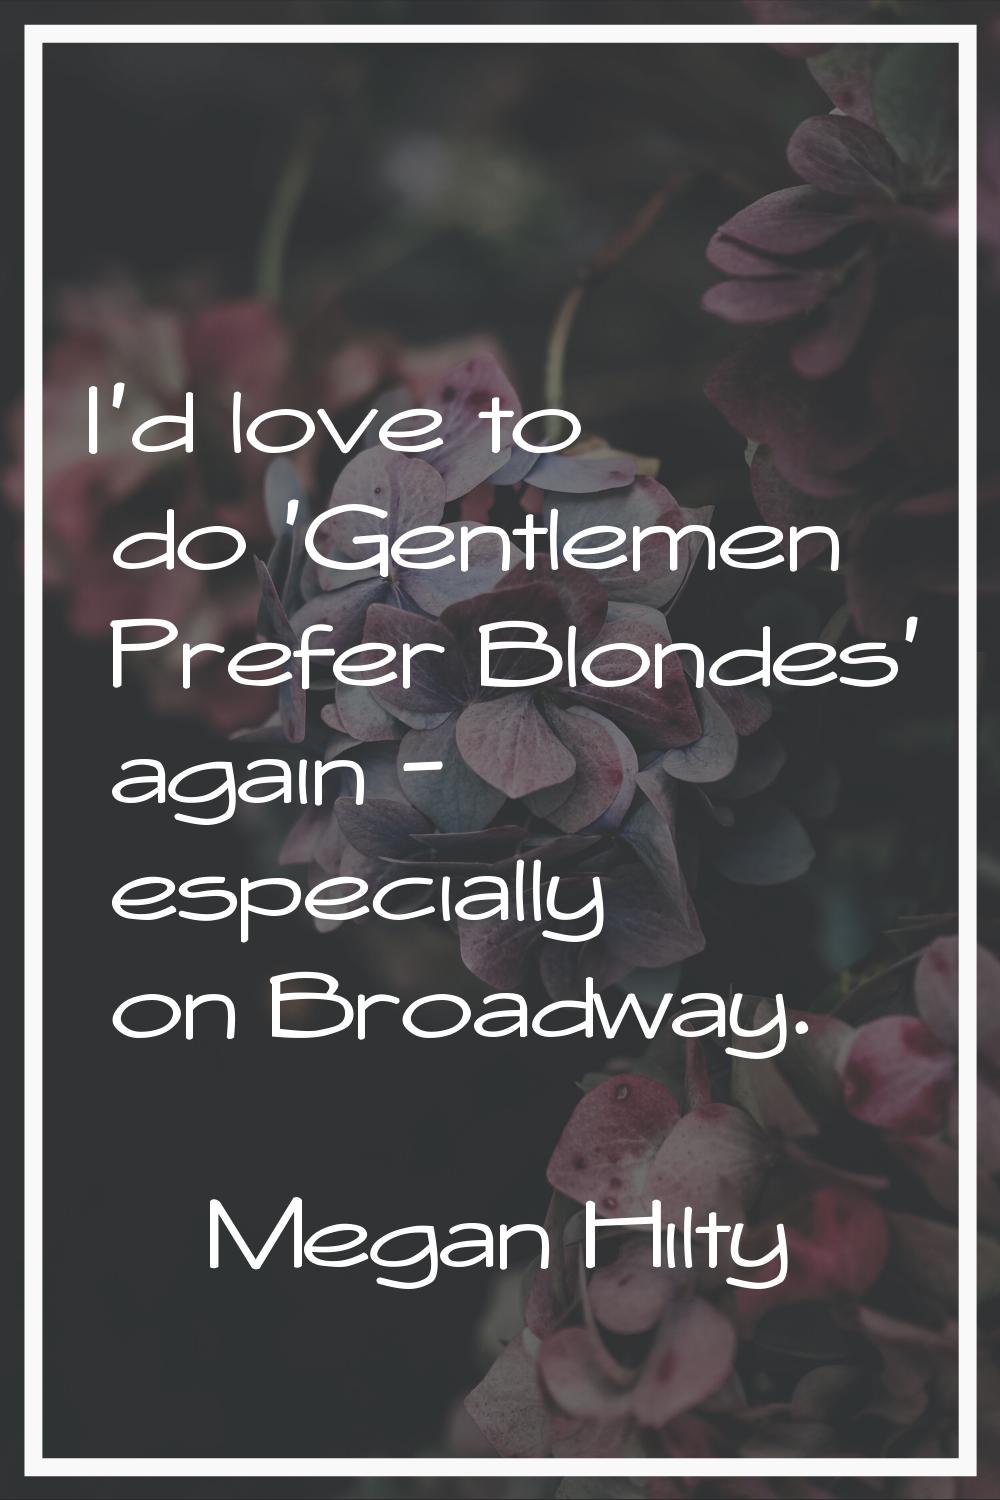 I'd love to do 'Gentlemen Prefer Blondes' again - especially on Broadway.